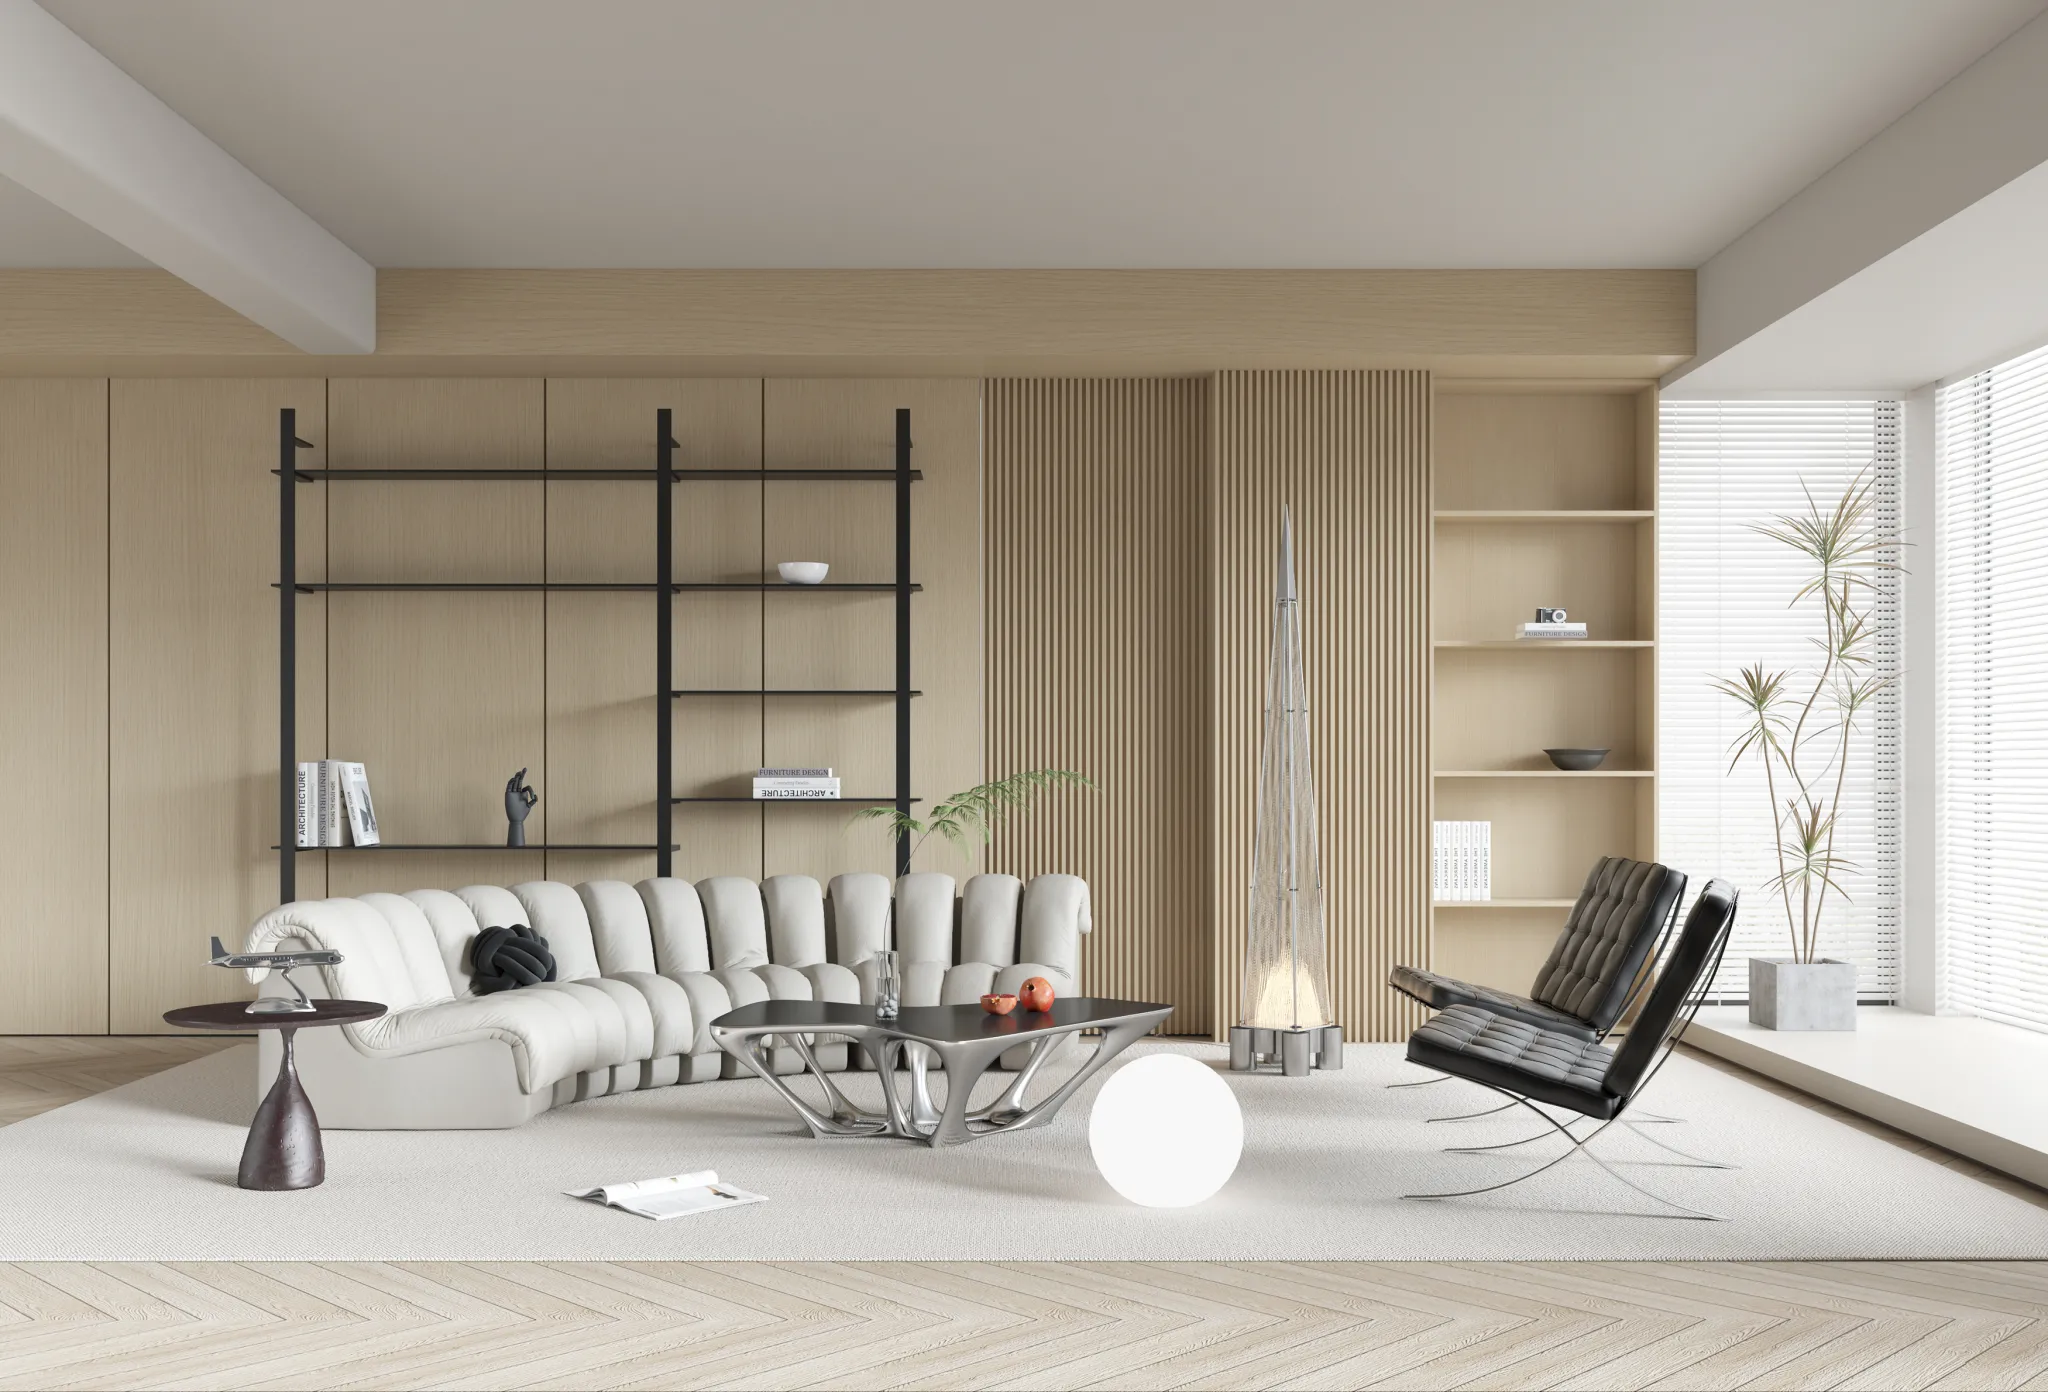 HOUSE SPACE 3D SCENES – LIVING ROOM – 0138